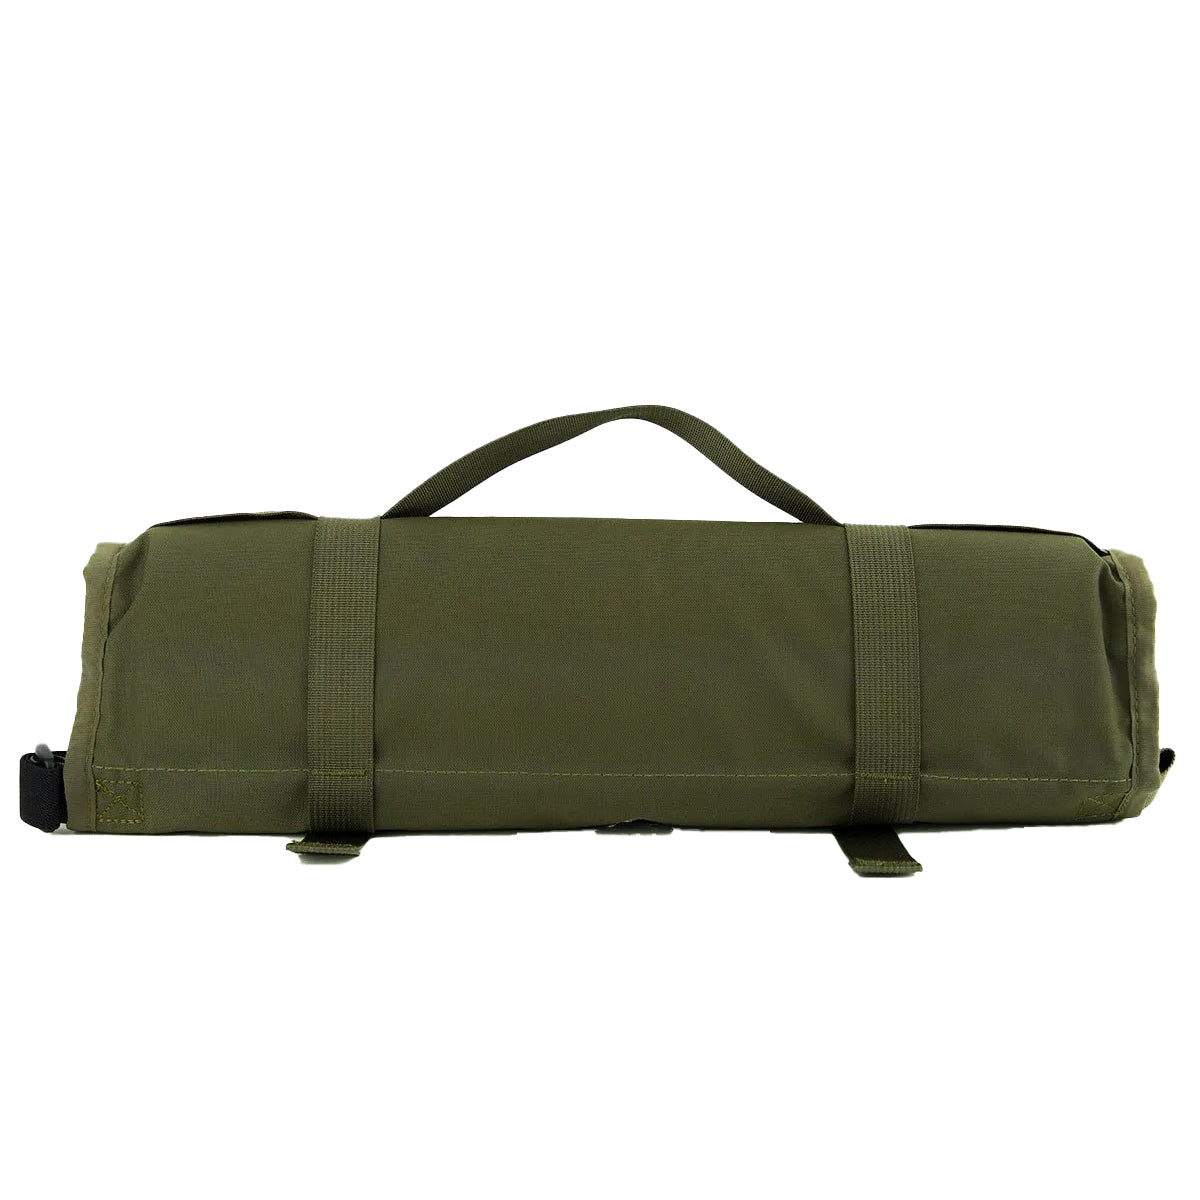 StHealthy Hunter 2-Piece Rifle Cover in Ranger Green by GOHUNT | StHealthy Hunter - GOHUNT Shop